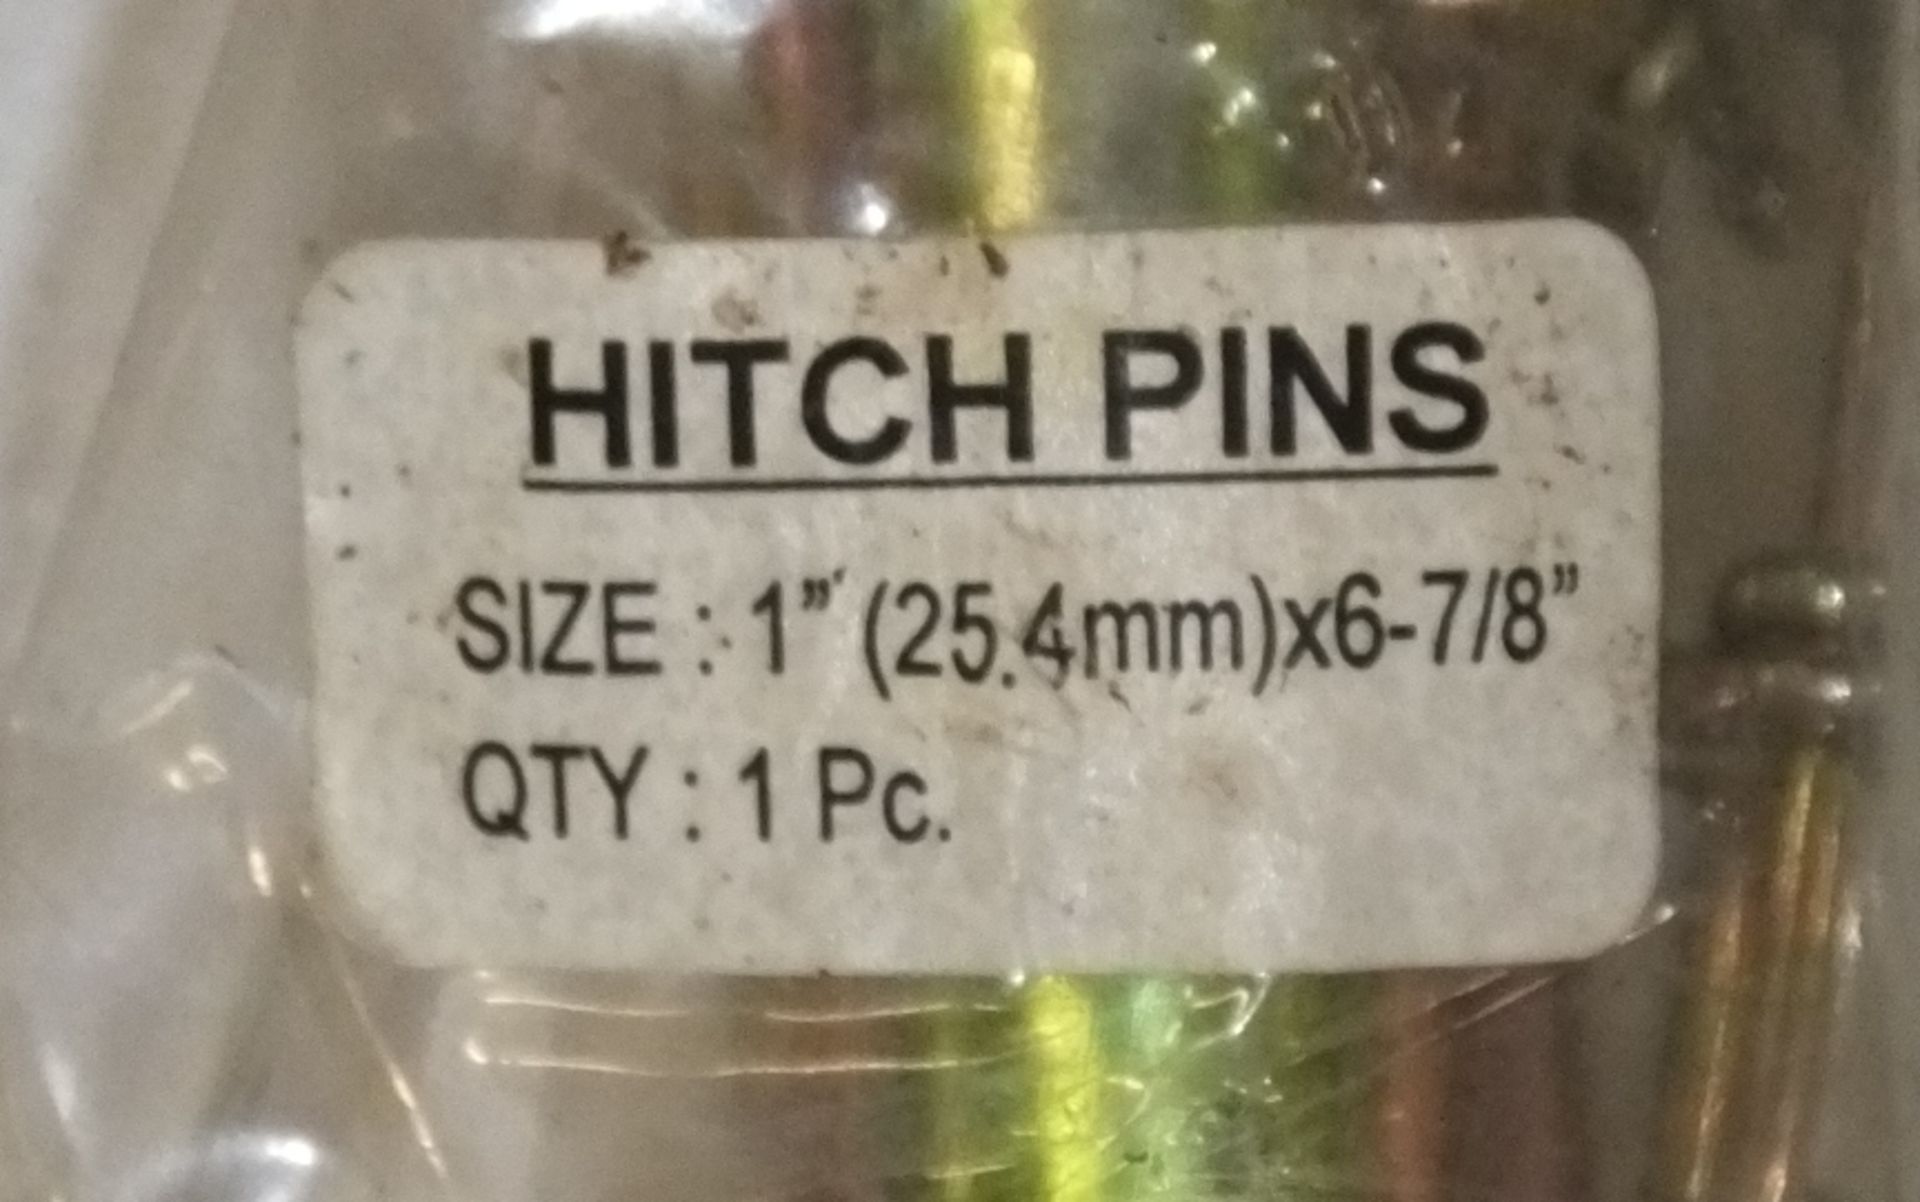 5x Hitch Pins 3/4" x 6 7/8" - Image 3 of 3